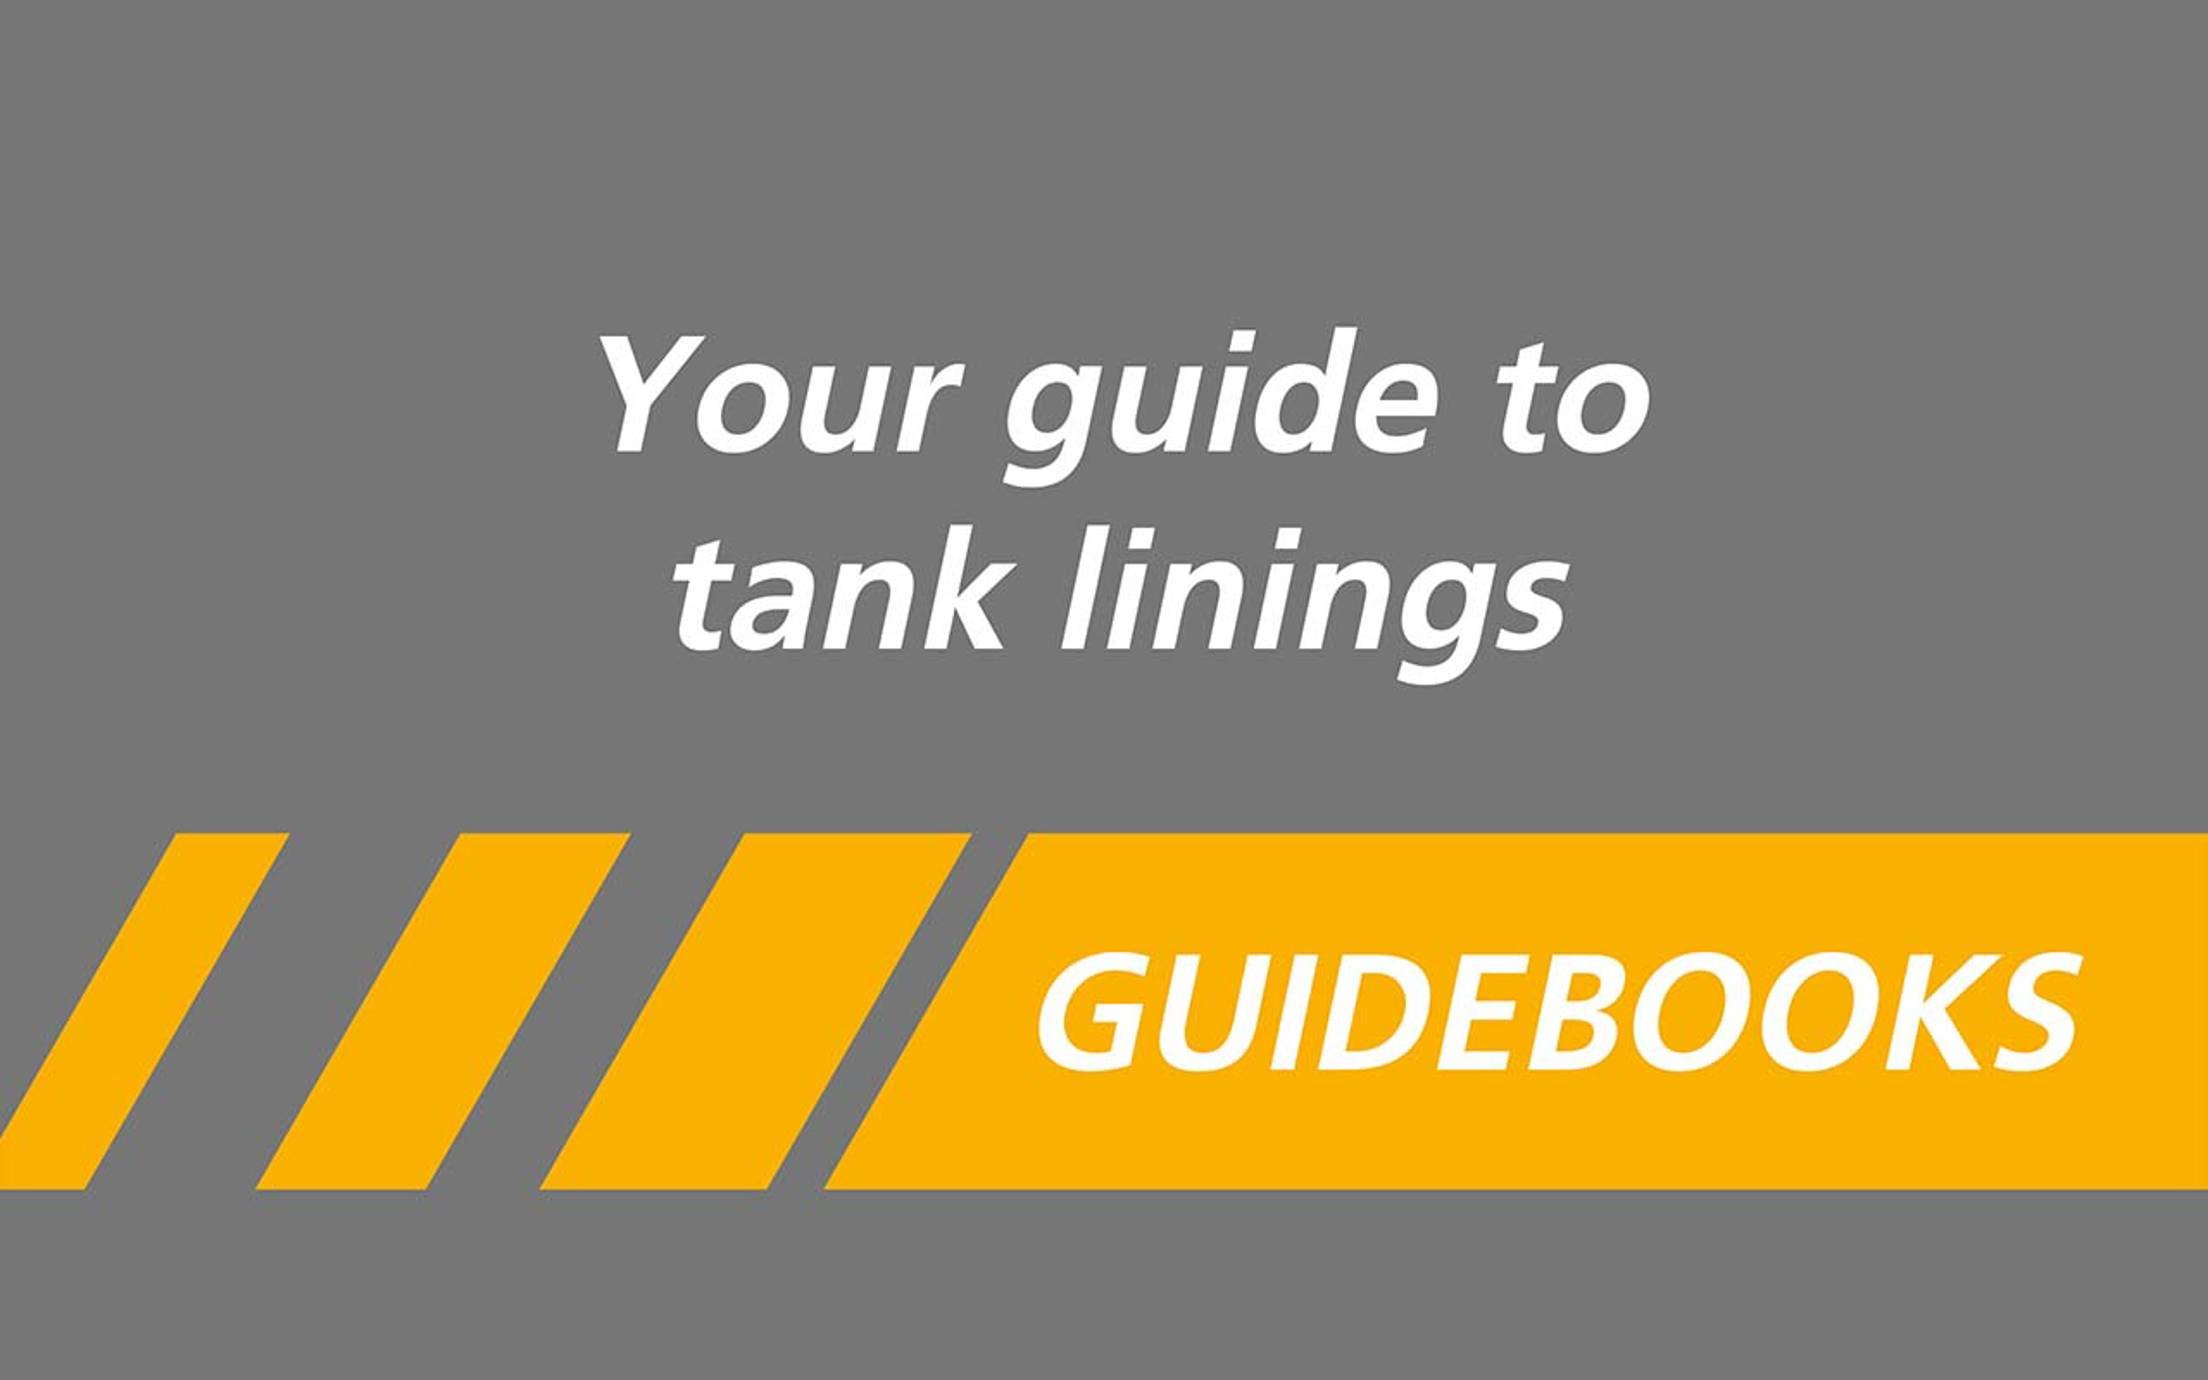 Image showing title of Jotun's guide book called Your guide to tank linings